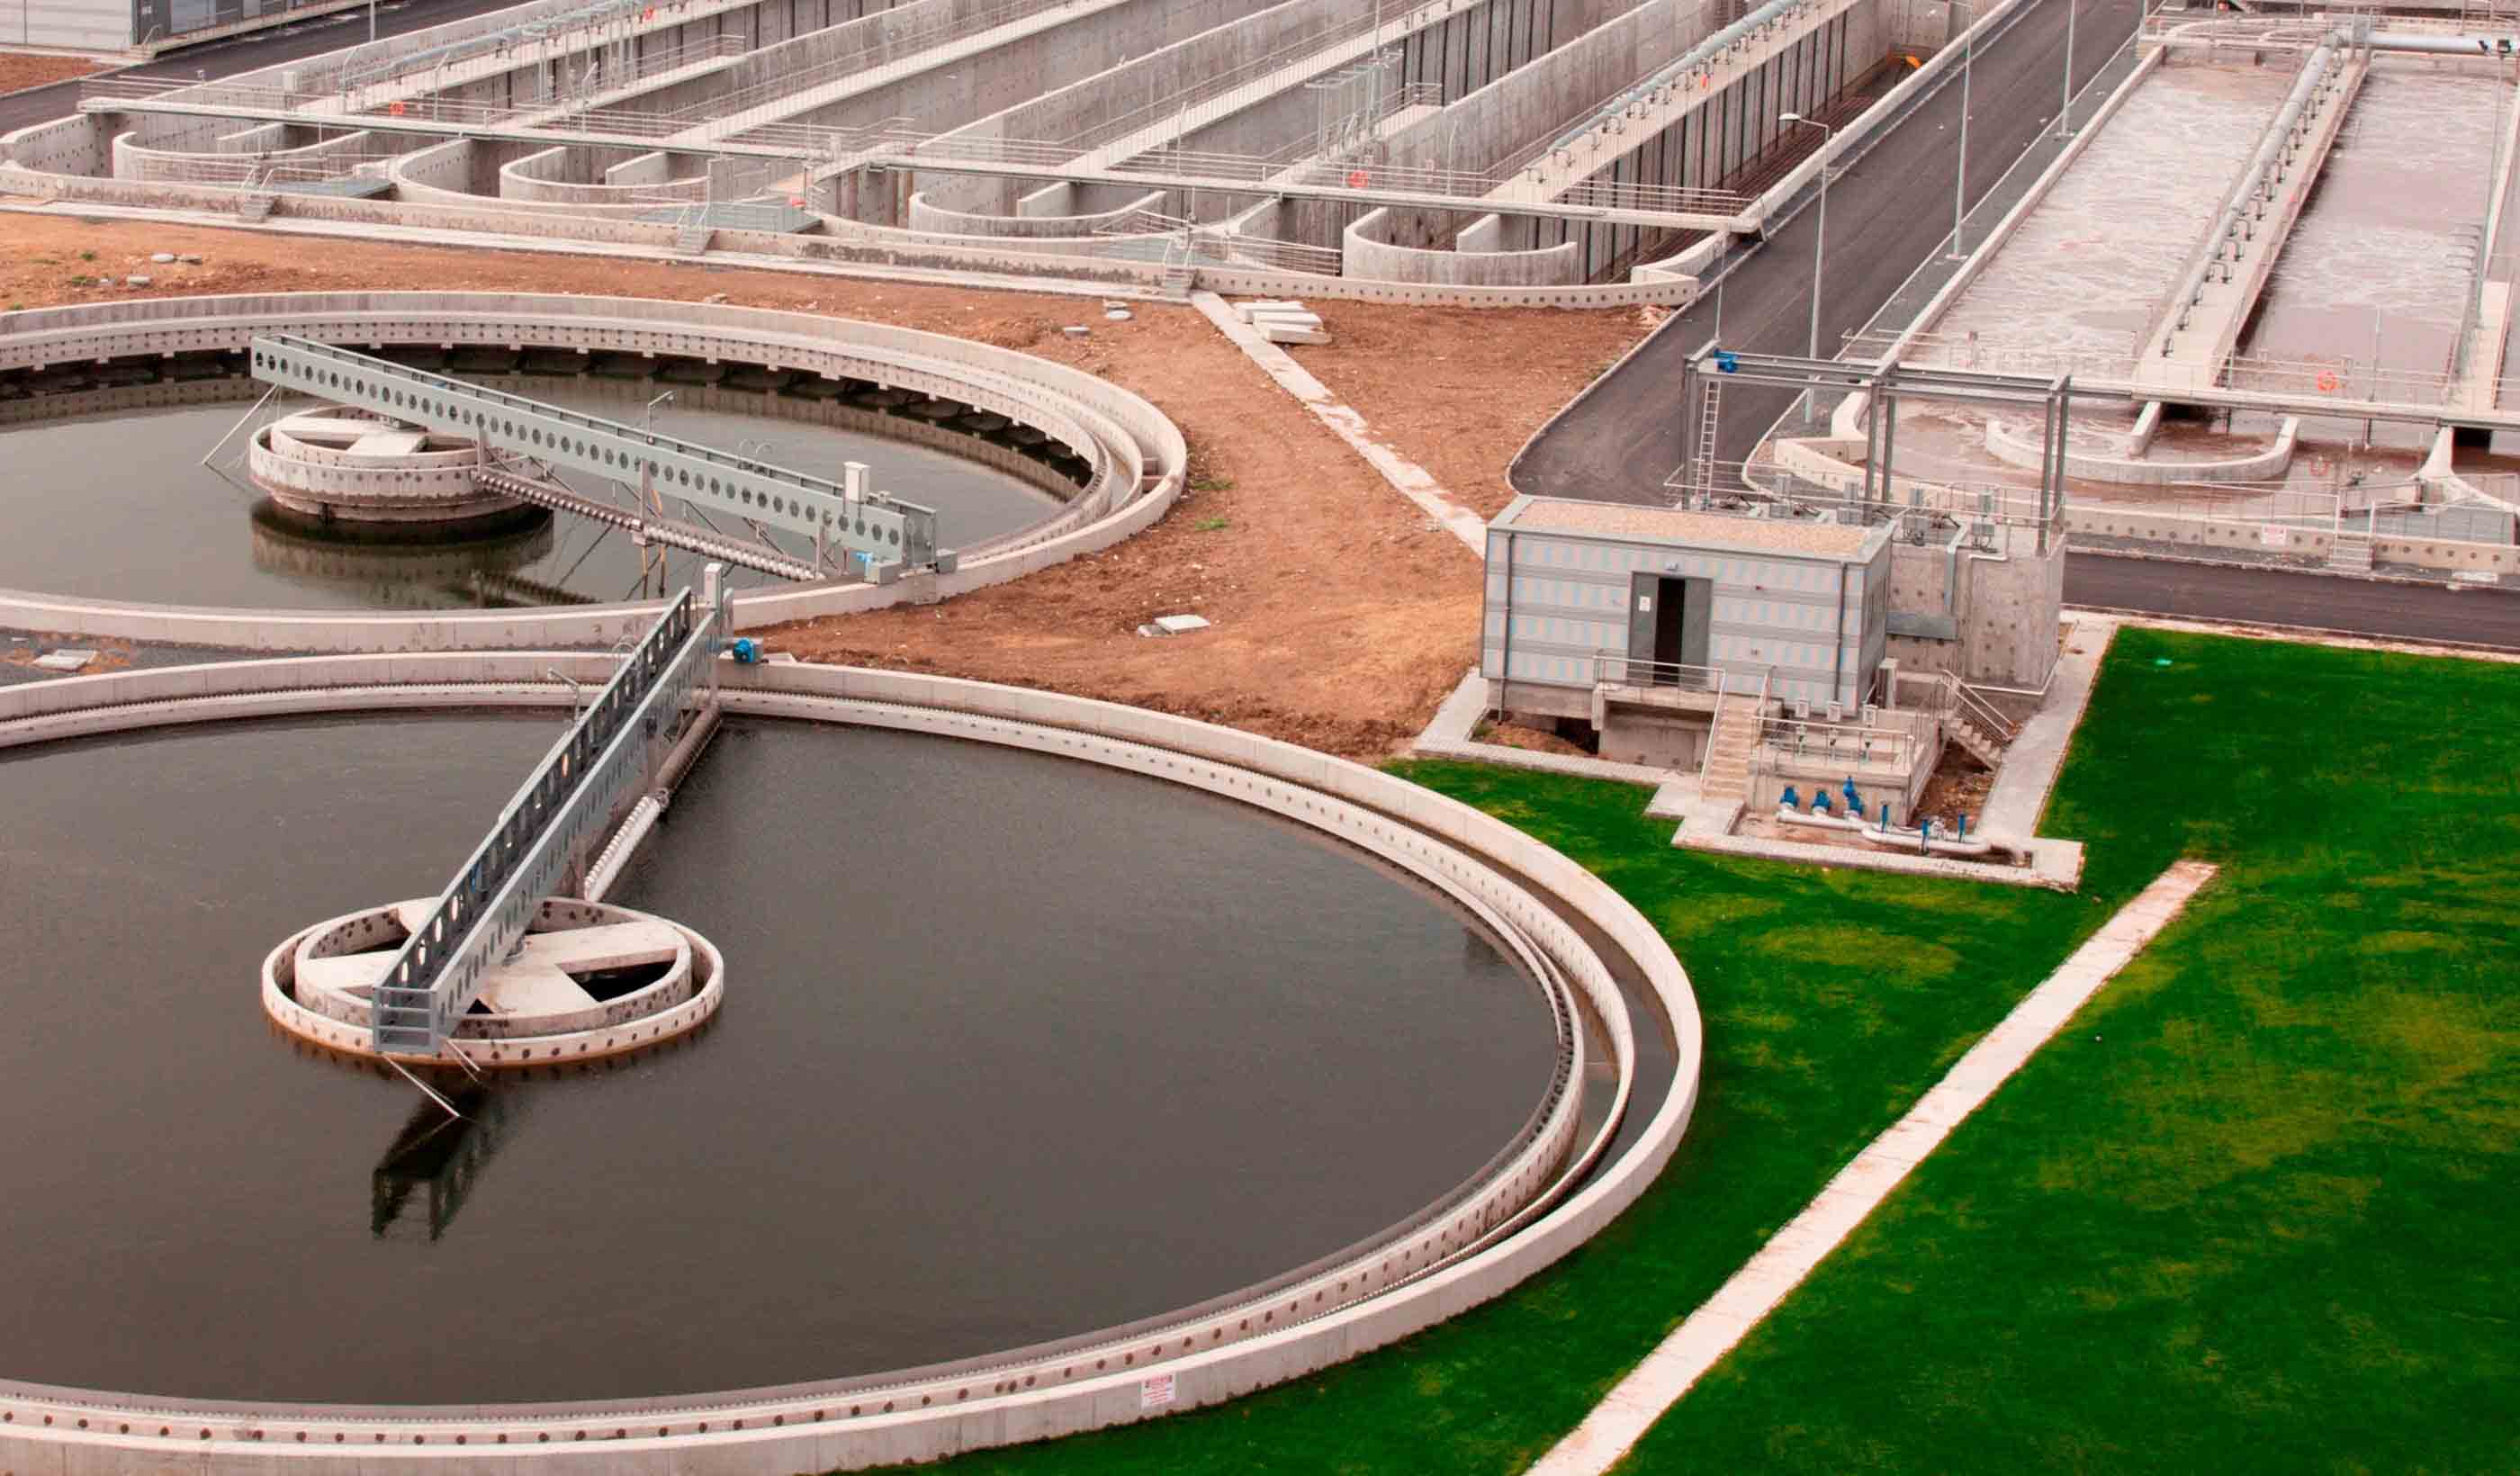 Developing wastewater’s circular economy: How do we create a market?